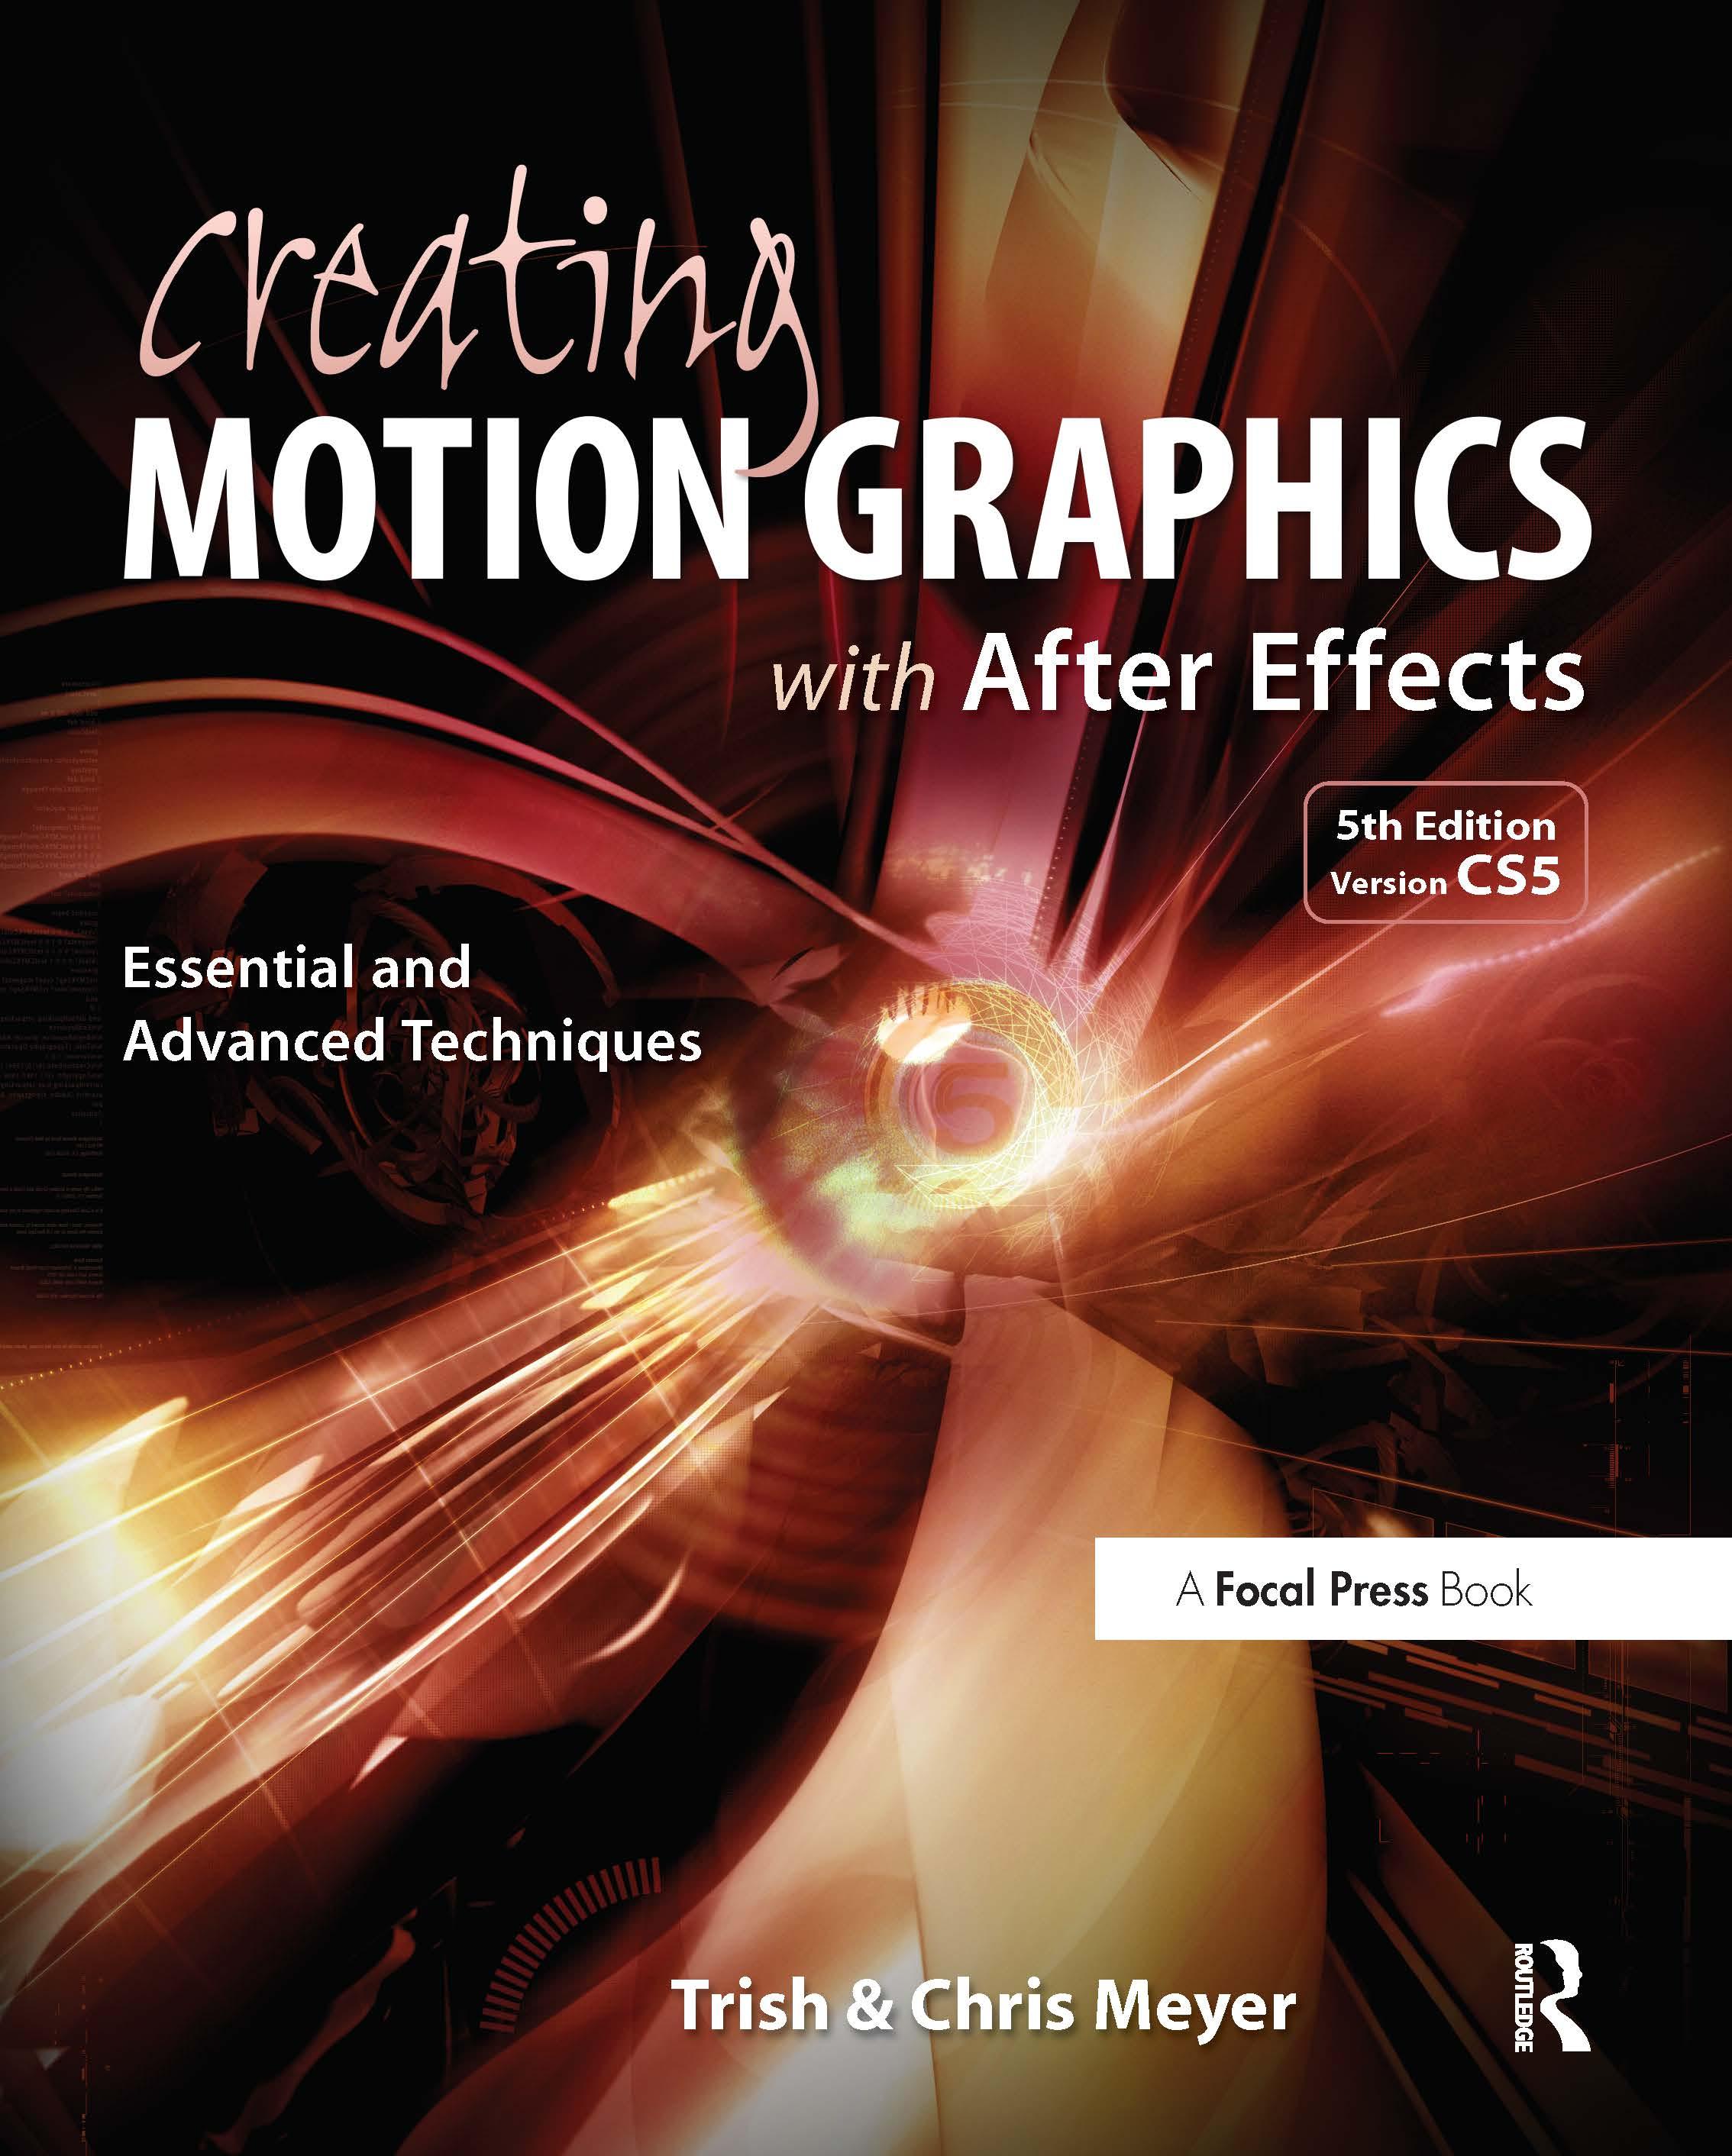 Creating Motion Graphics with After Effects - Chris Meyer (Crish Design, USA)